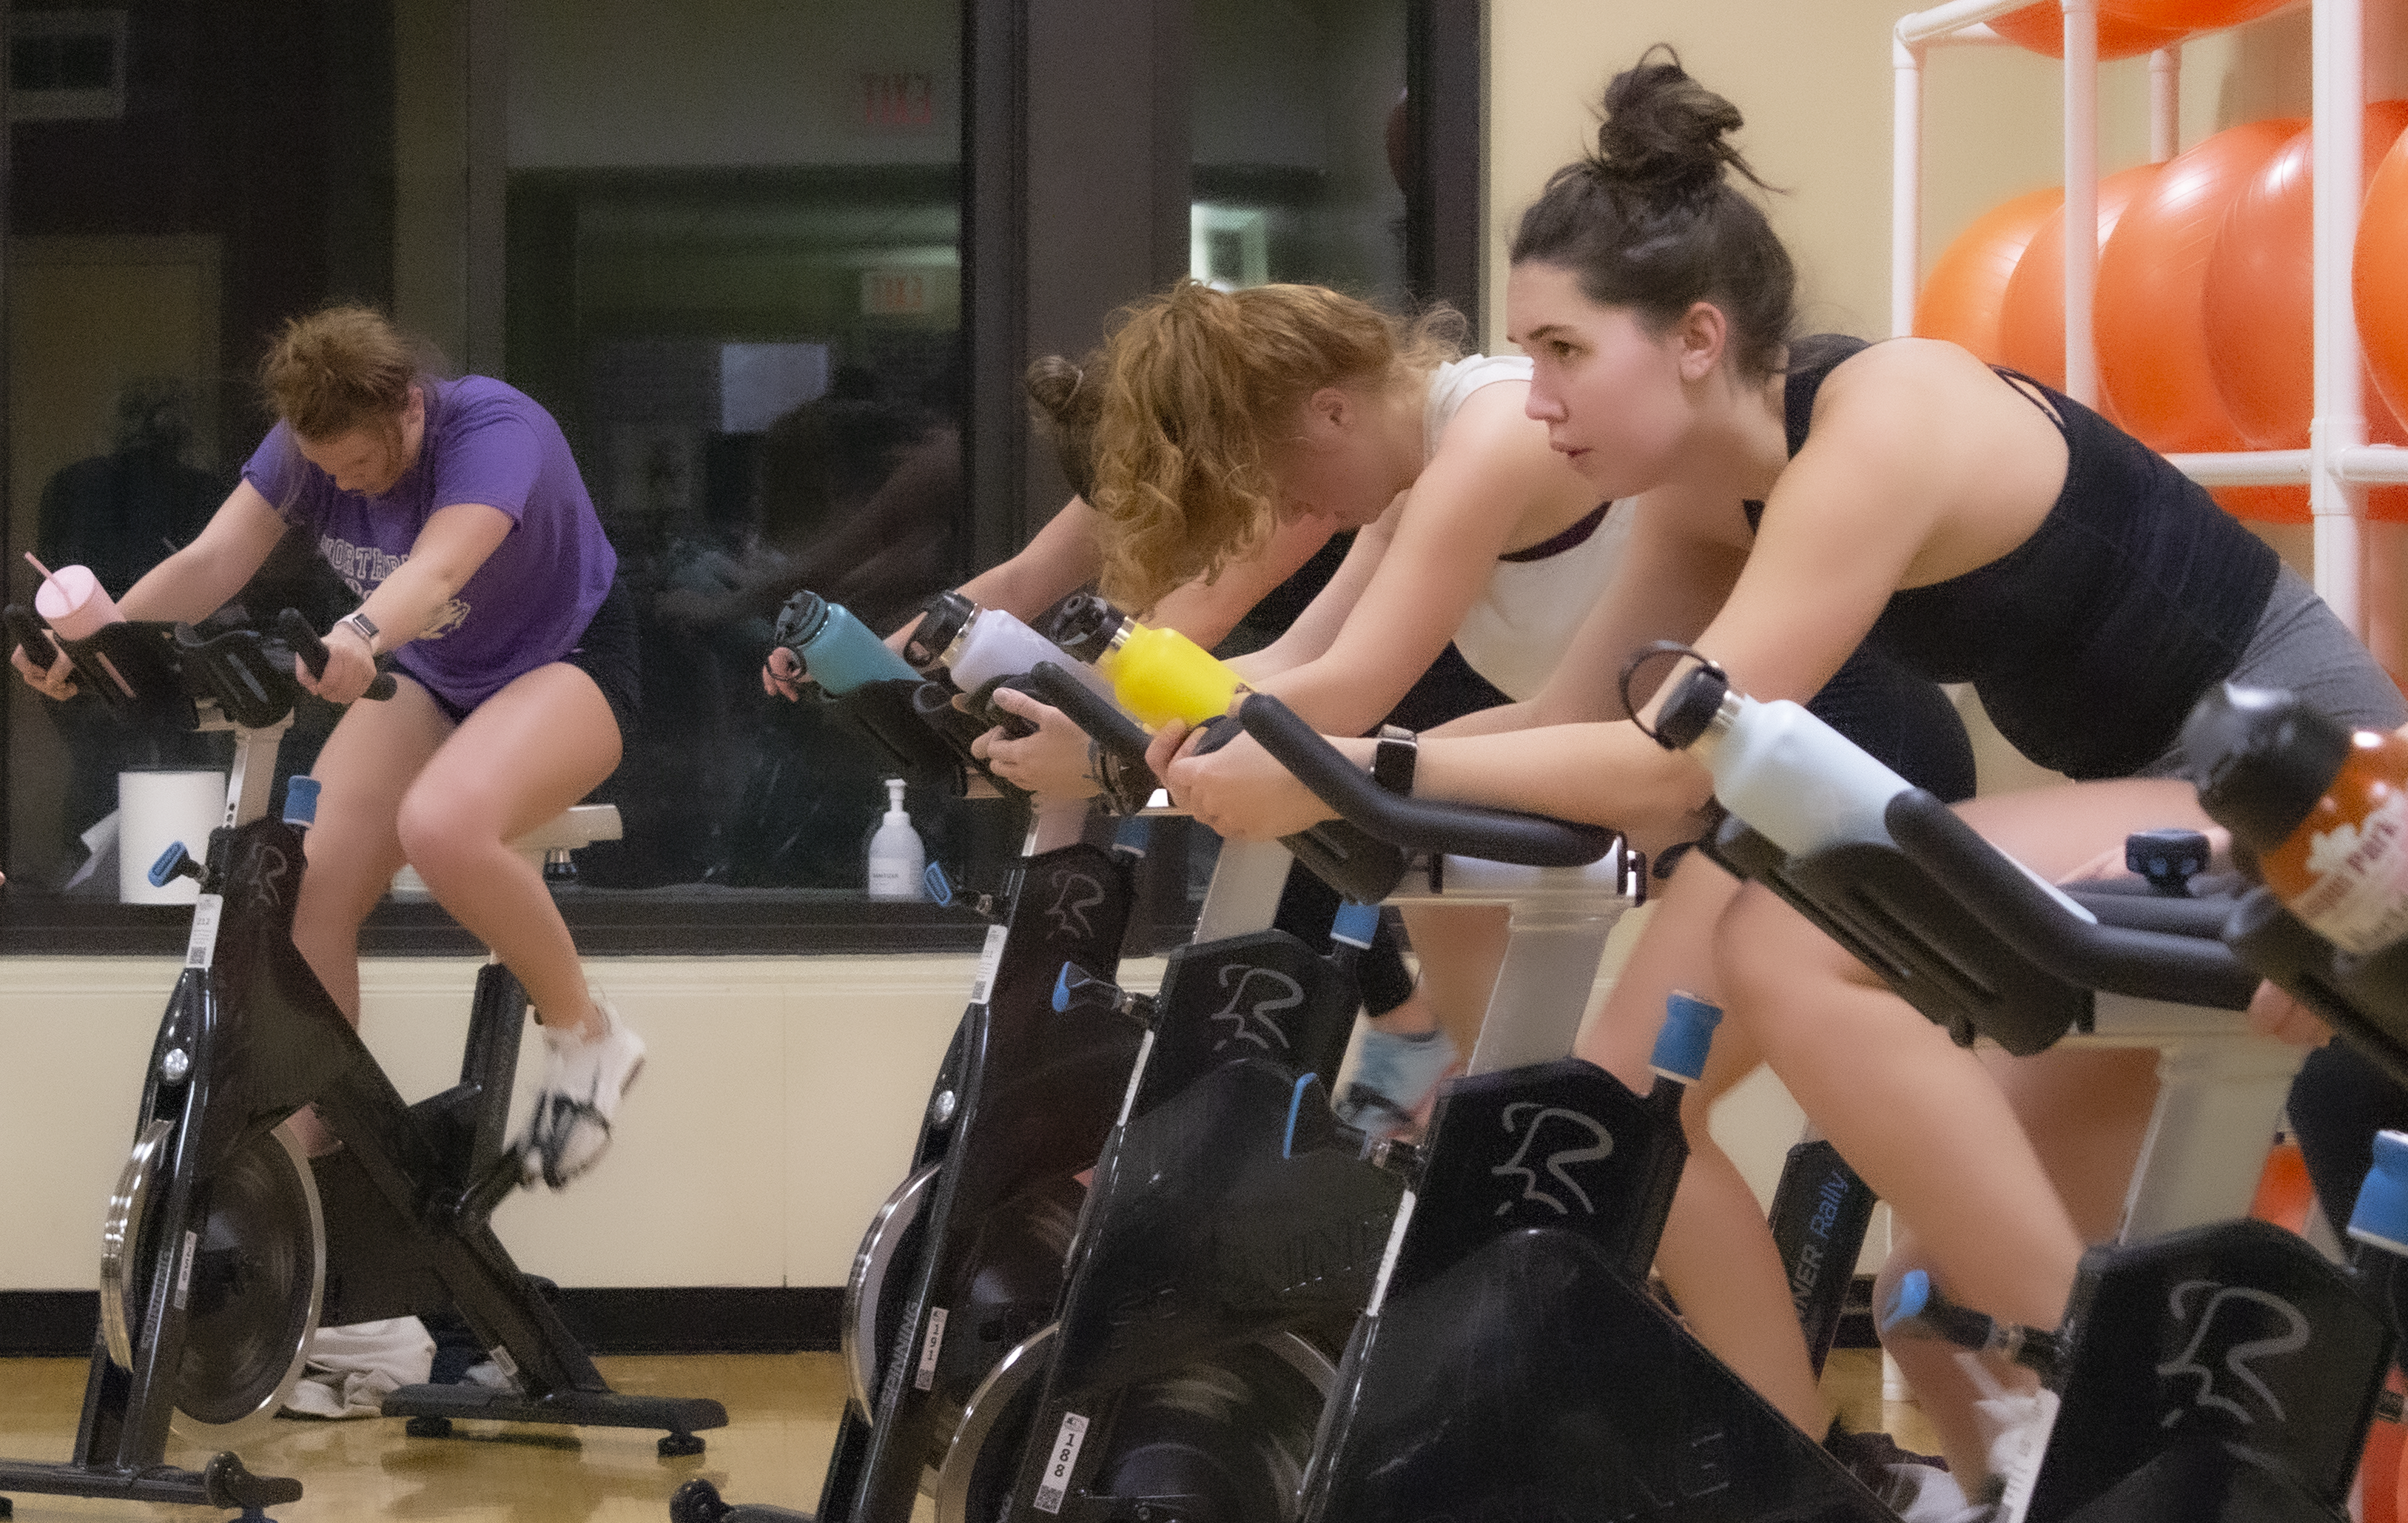 students in a spin class riding stationary bikes